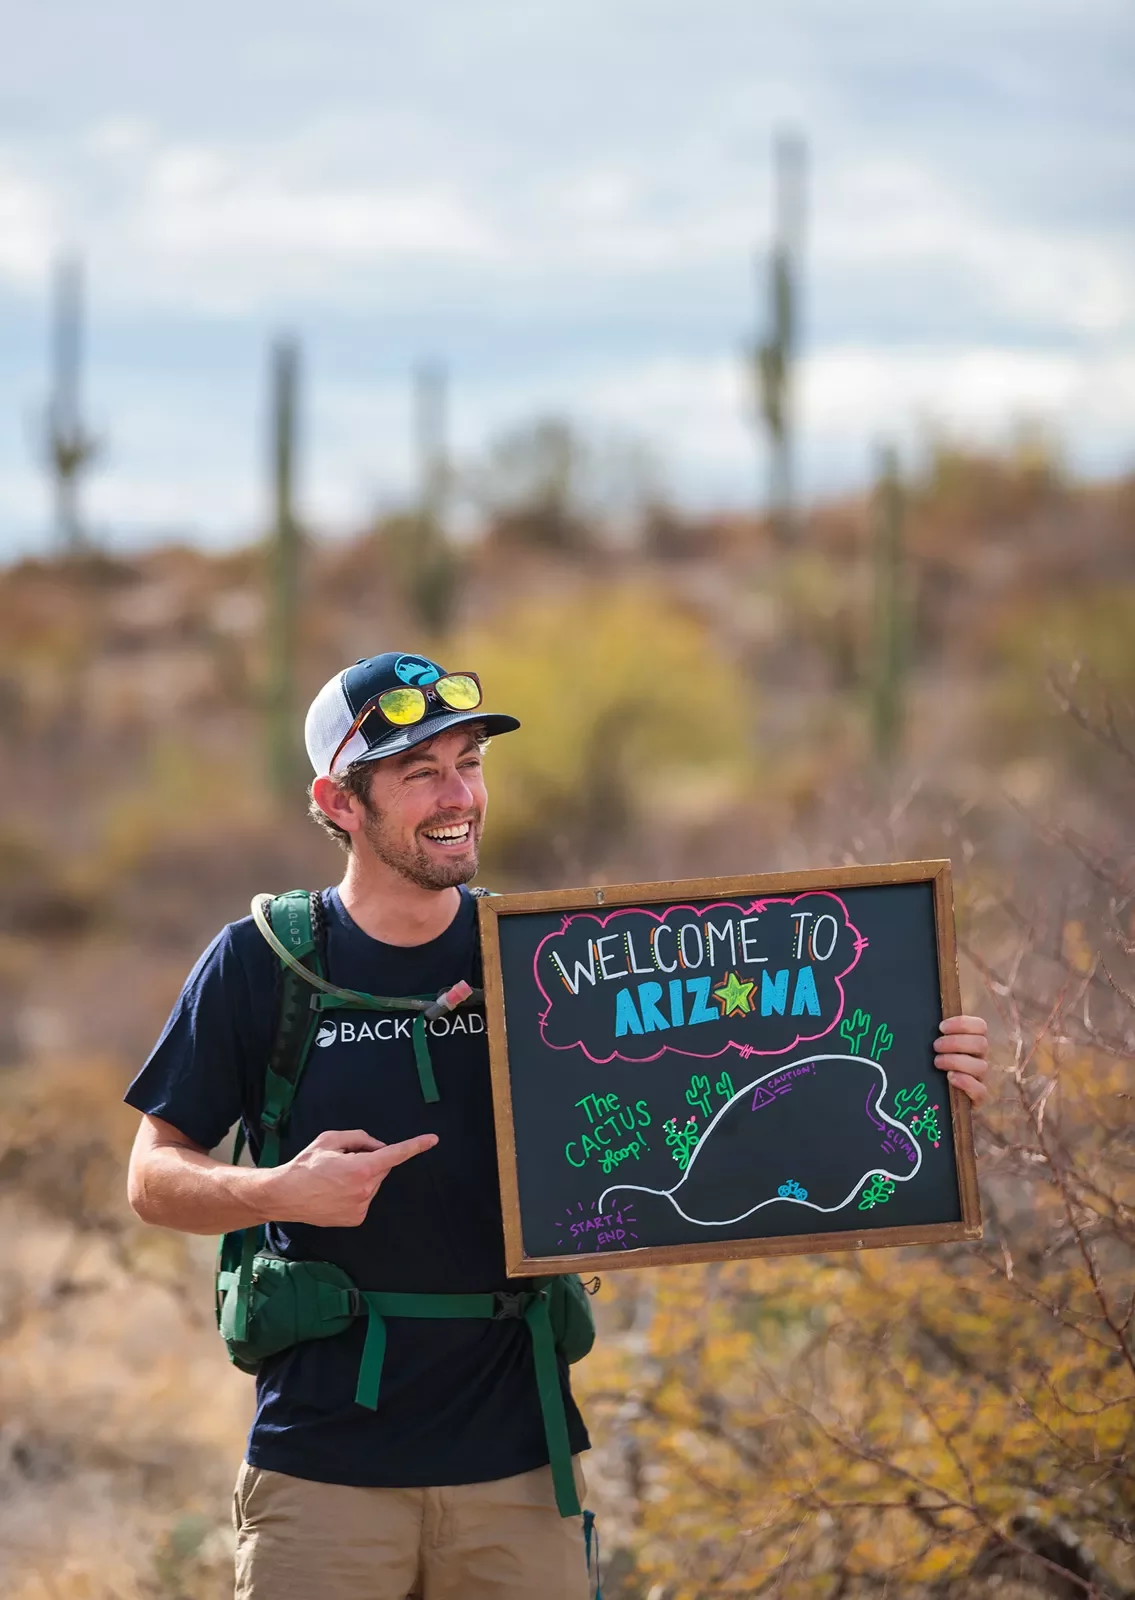 Leader holding a welcome to Arizona sign